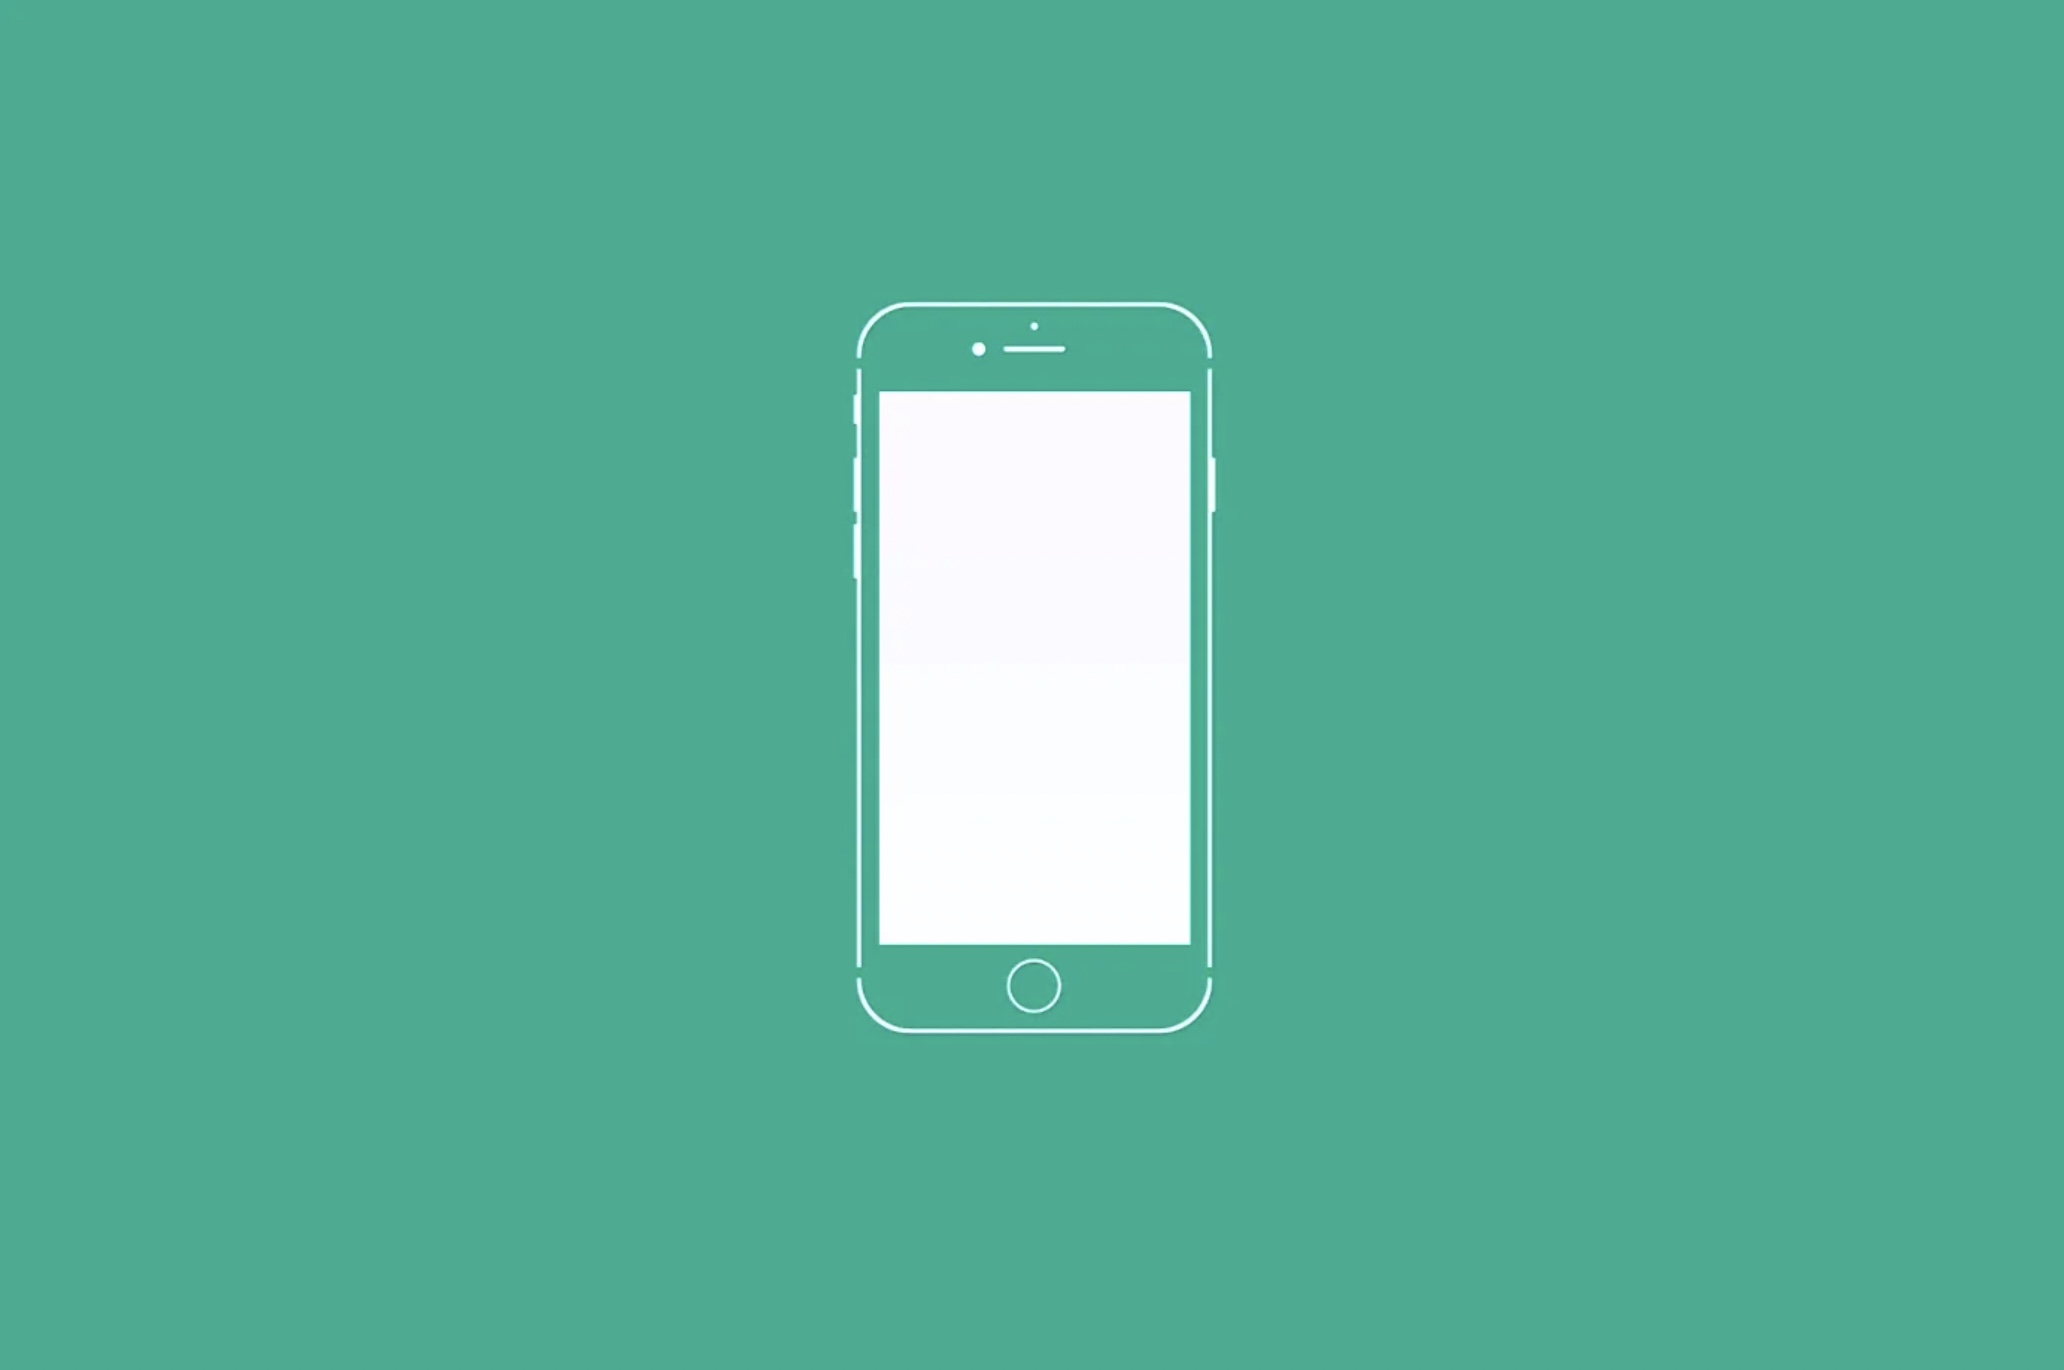 iPhone security: image of iPhone with green background